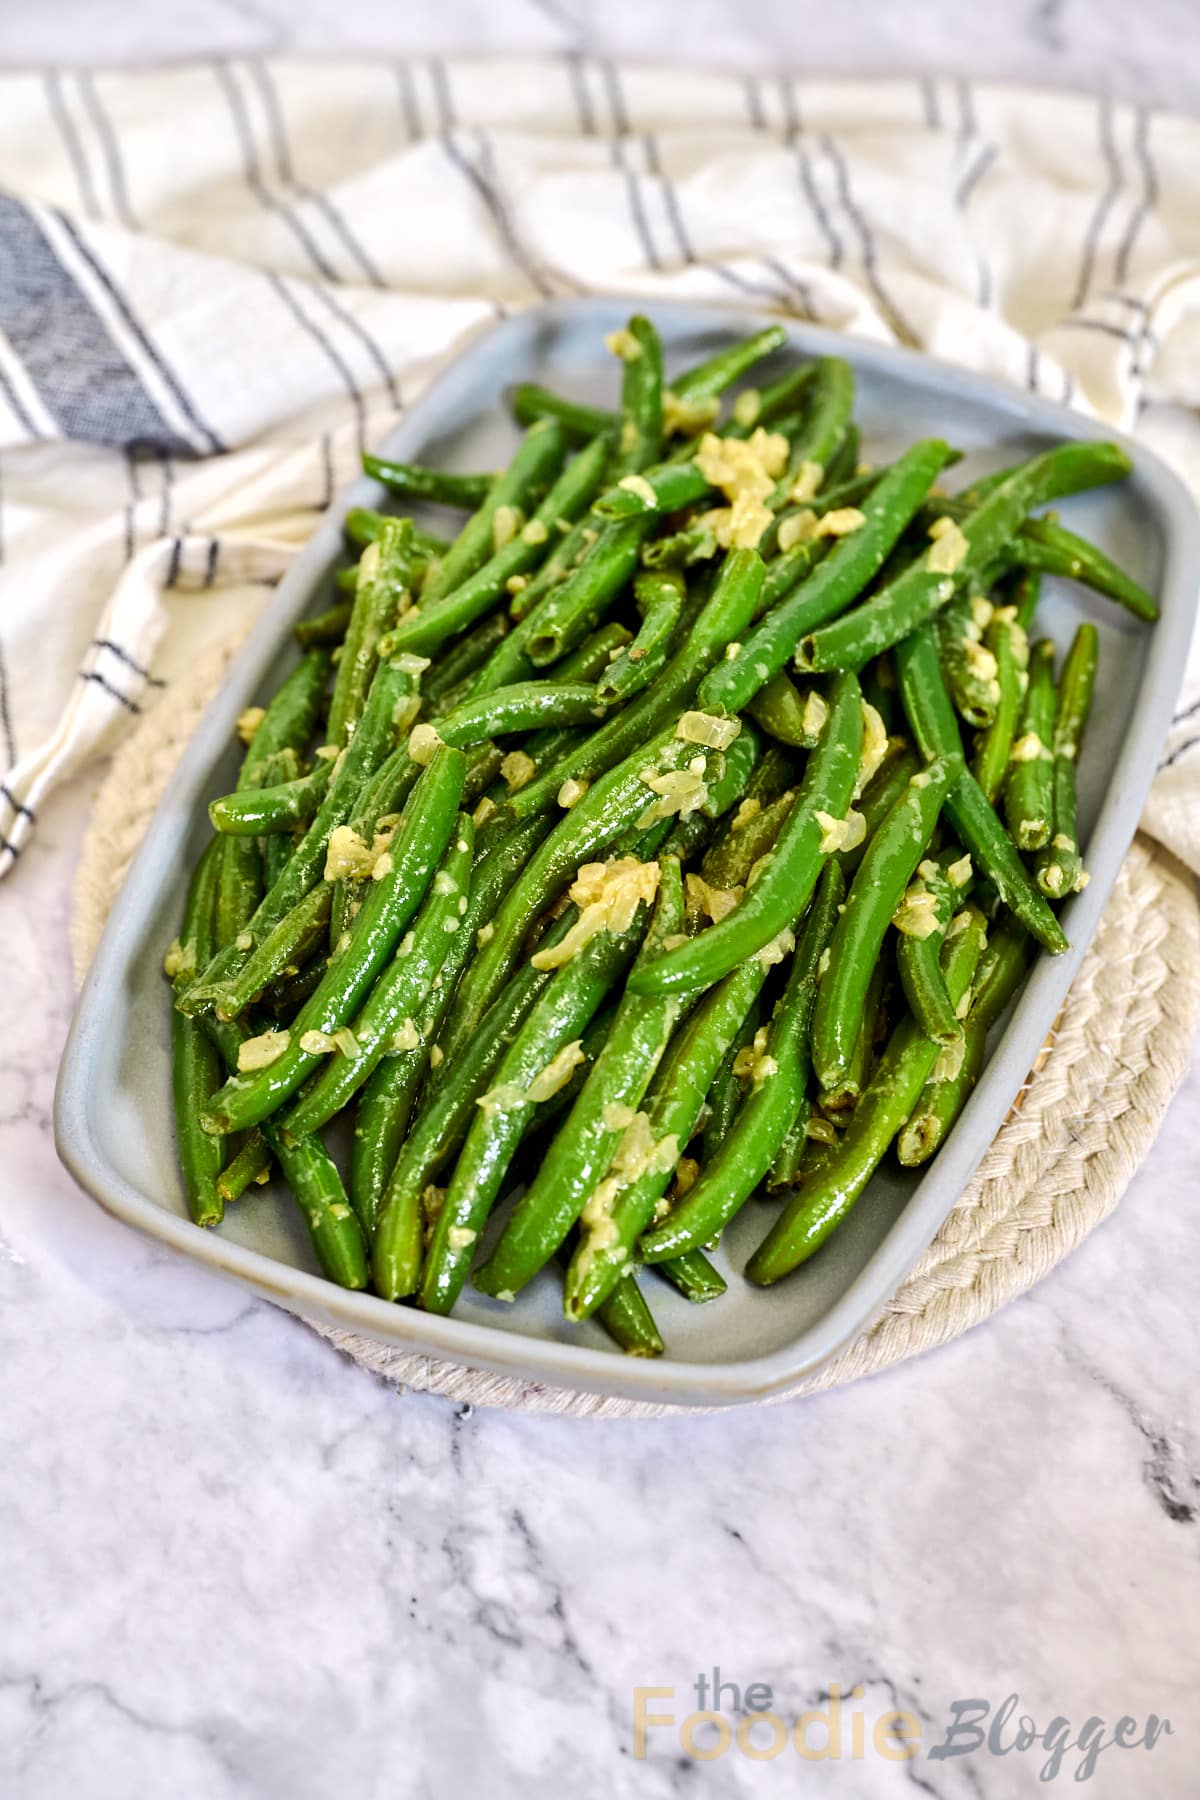 TheFoodieBlogger Sauteed Green Beans Recipe